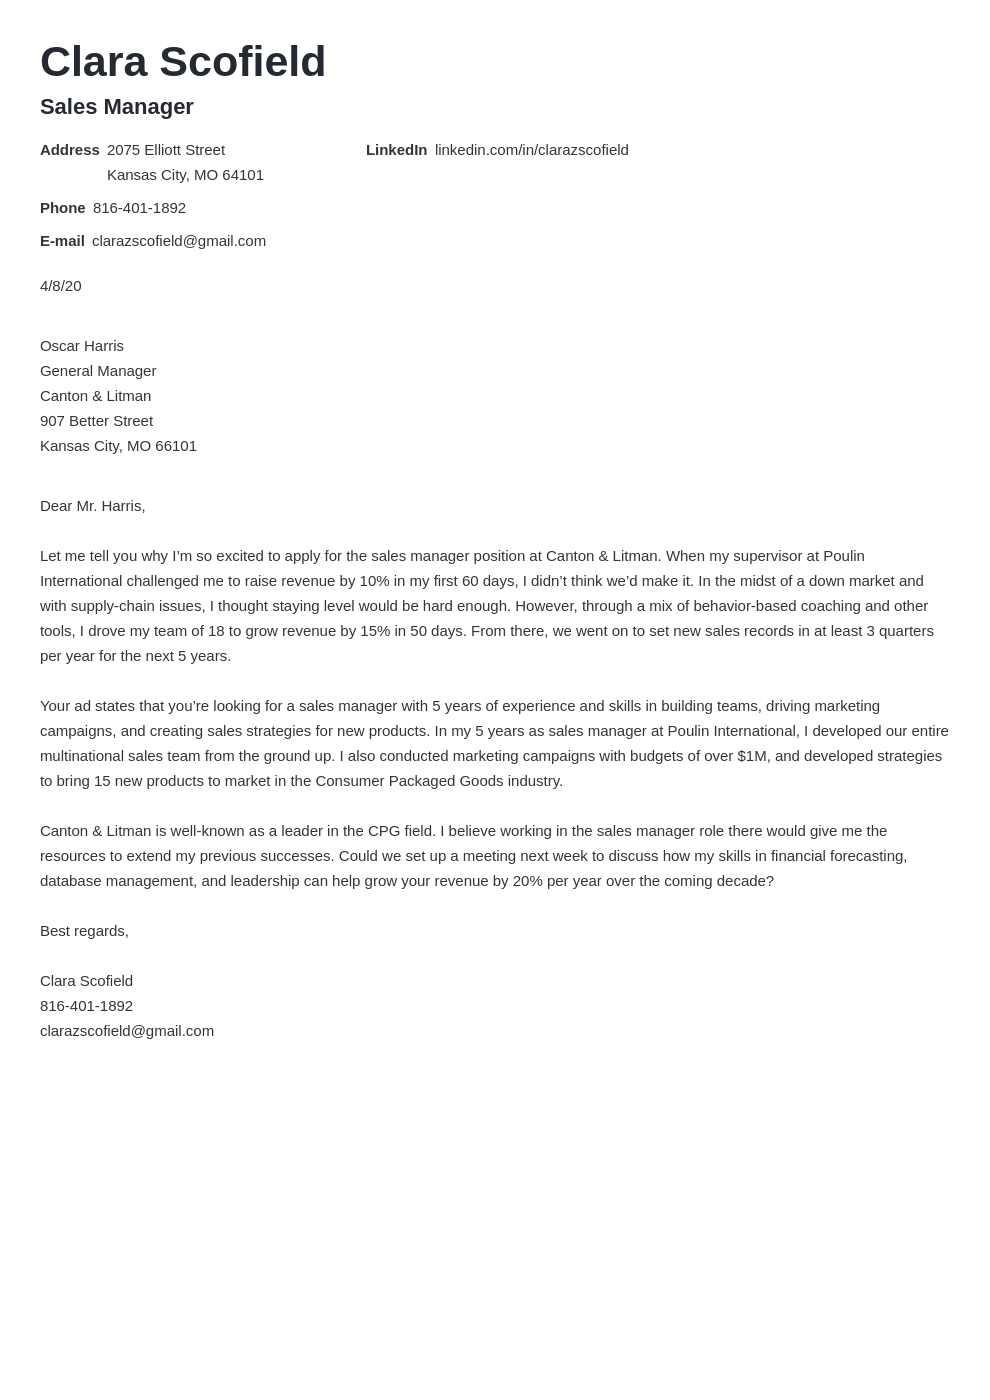 sales manager application letter template